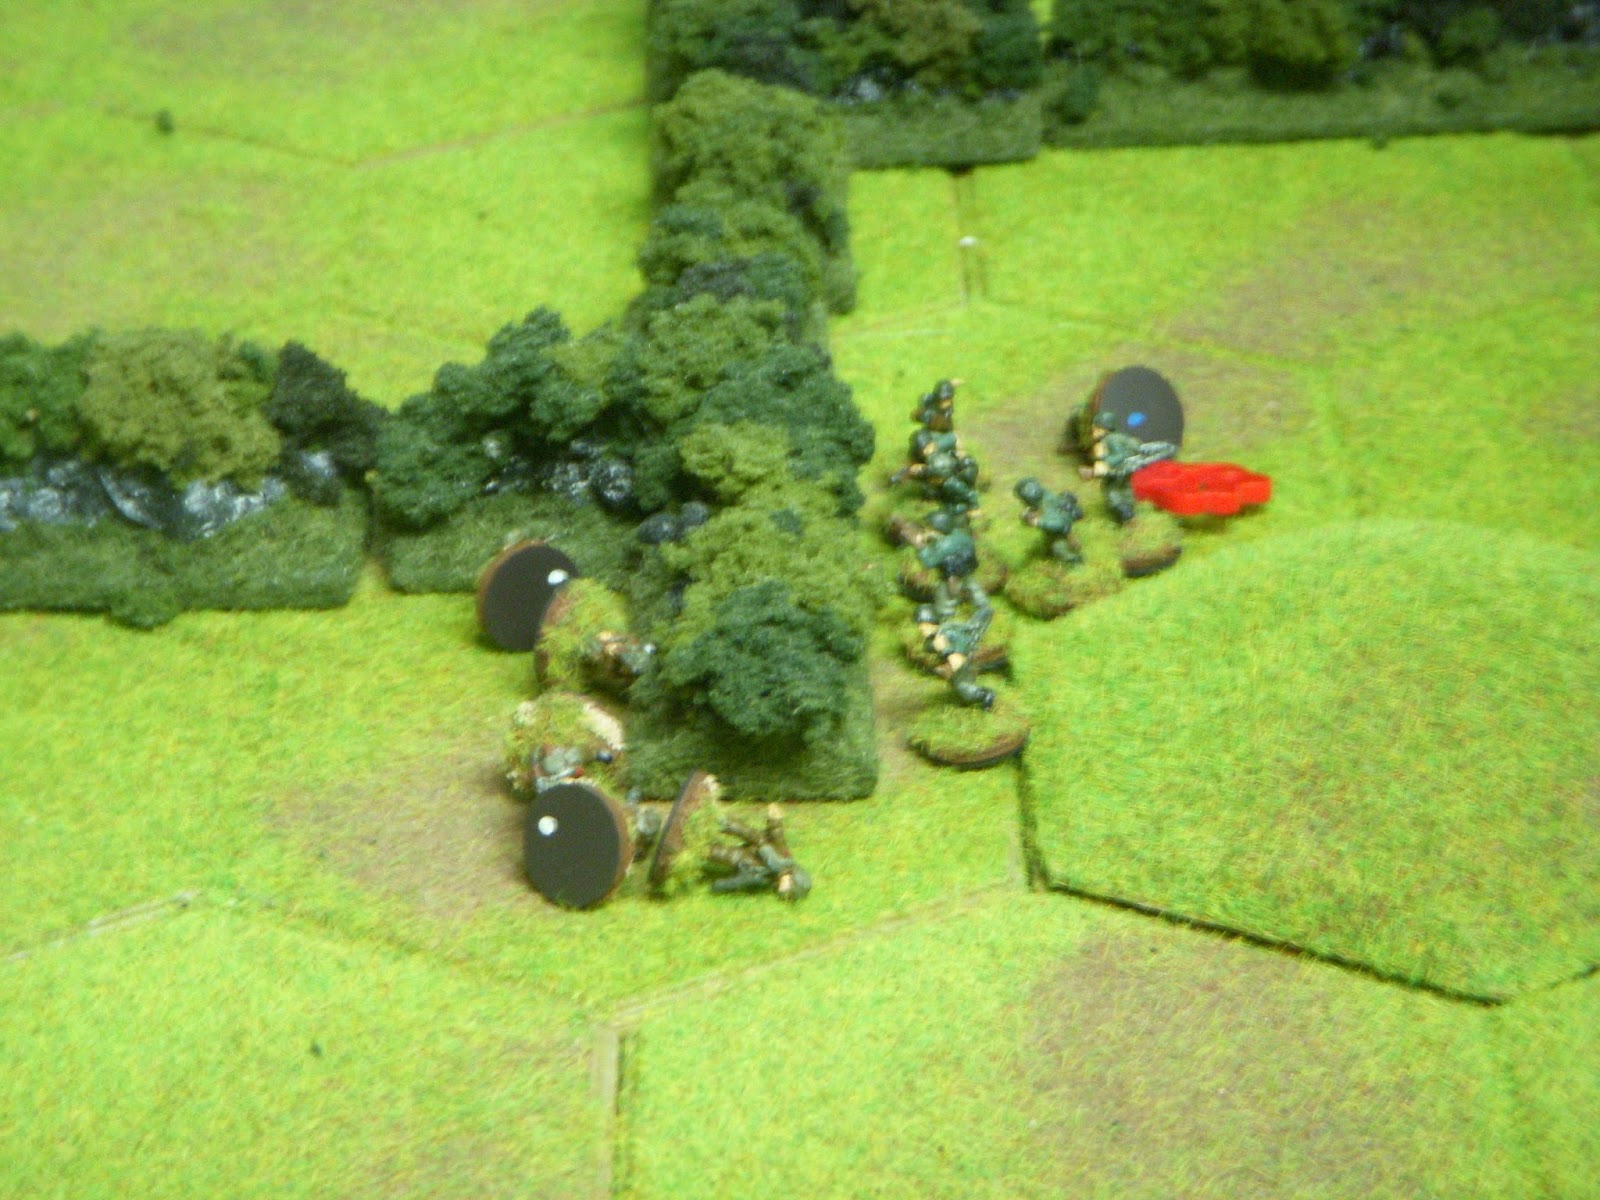  A squad in the centre is not so lucky: five men down in an ambush 